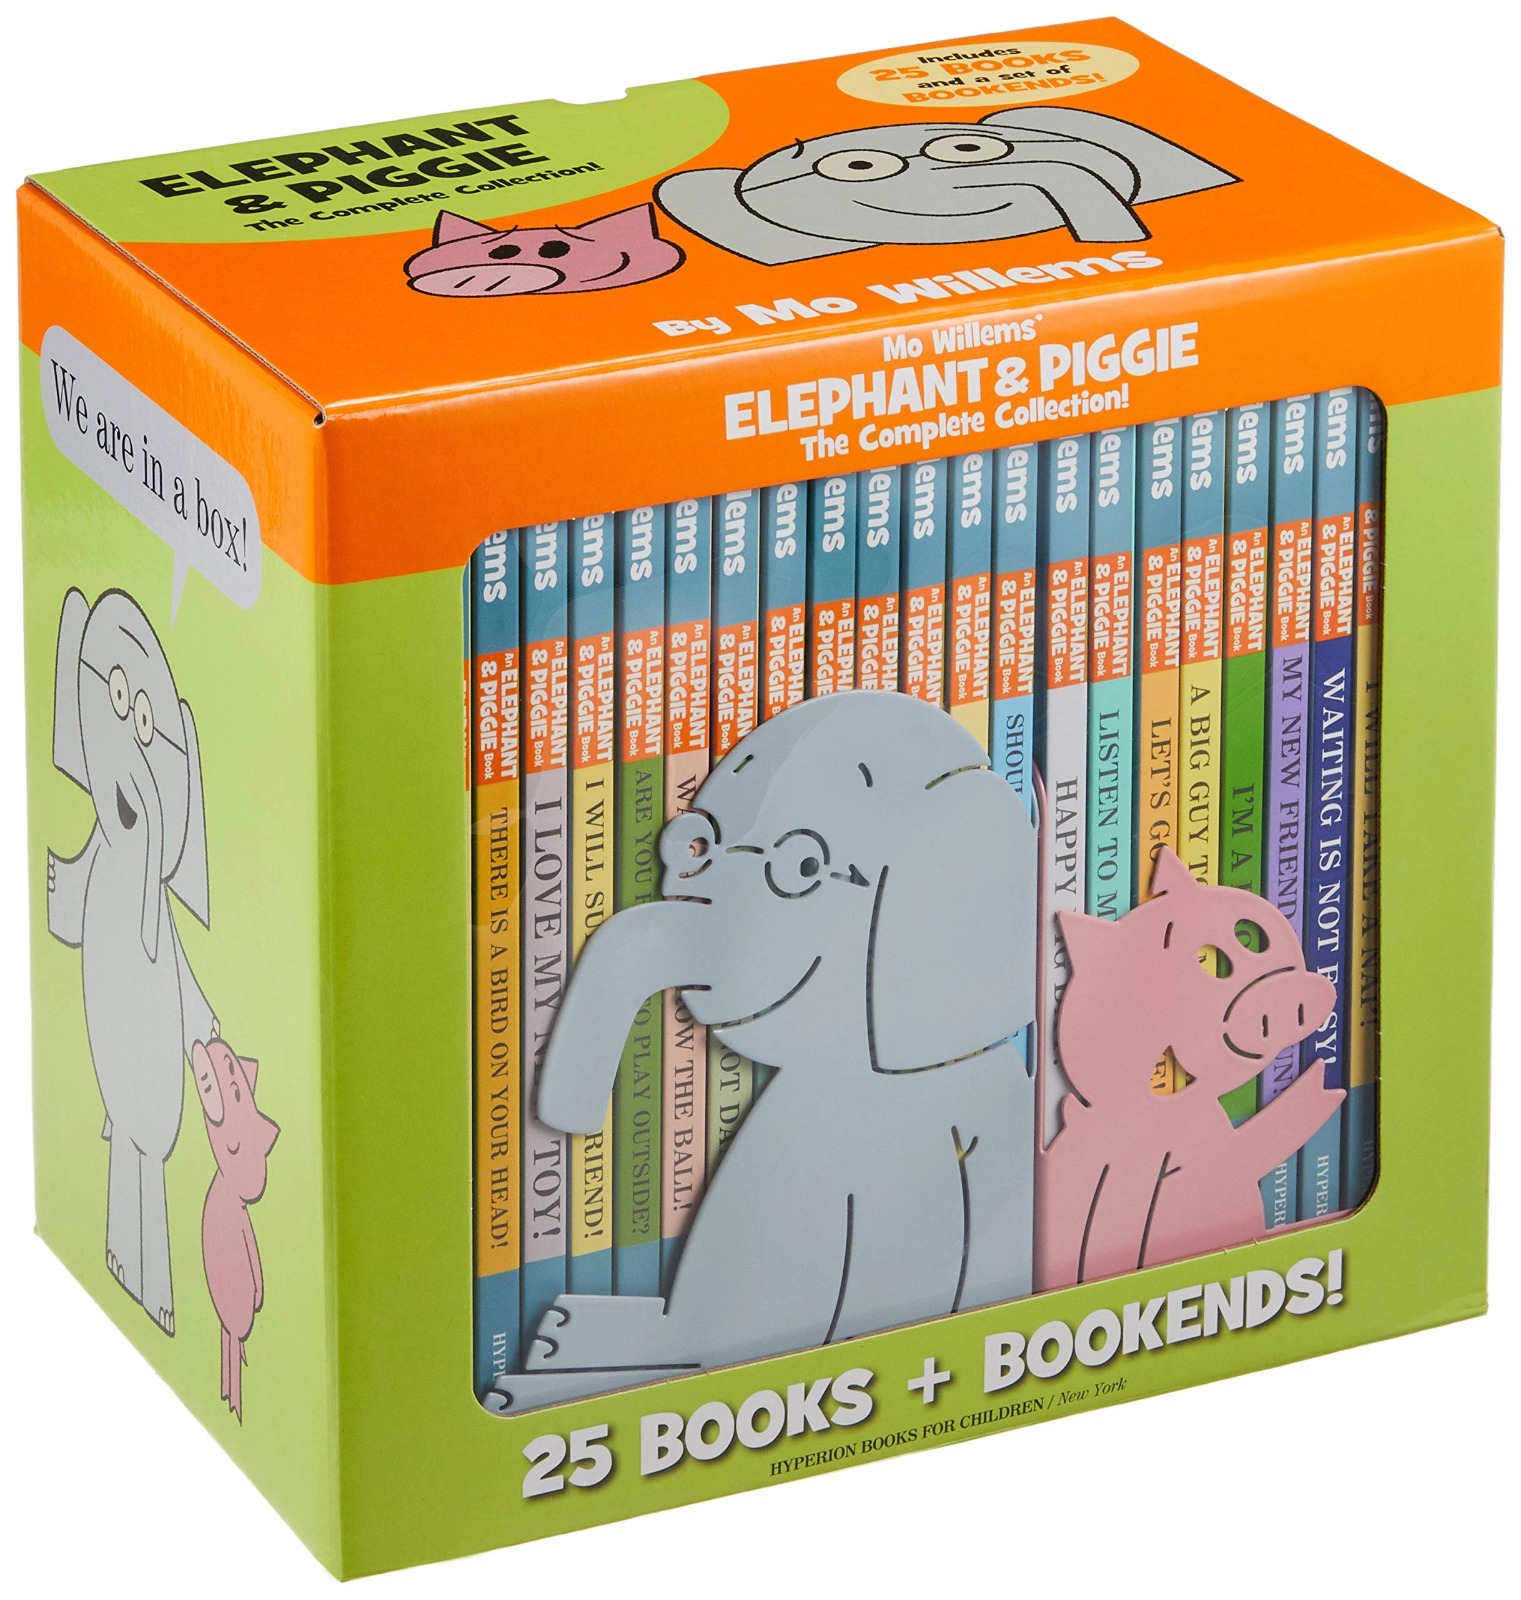 Elephant & Piggie: The Complete Collection 25 books (An Elephant 